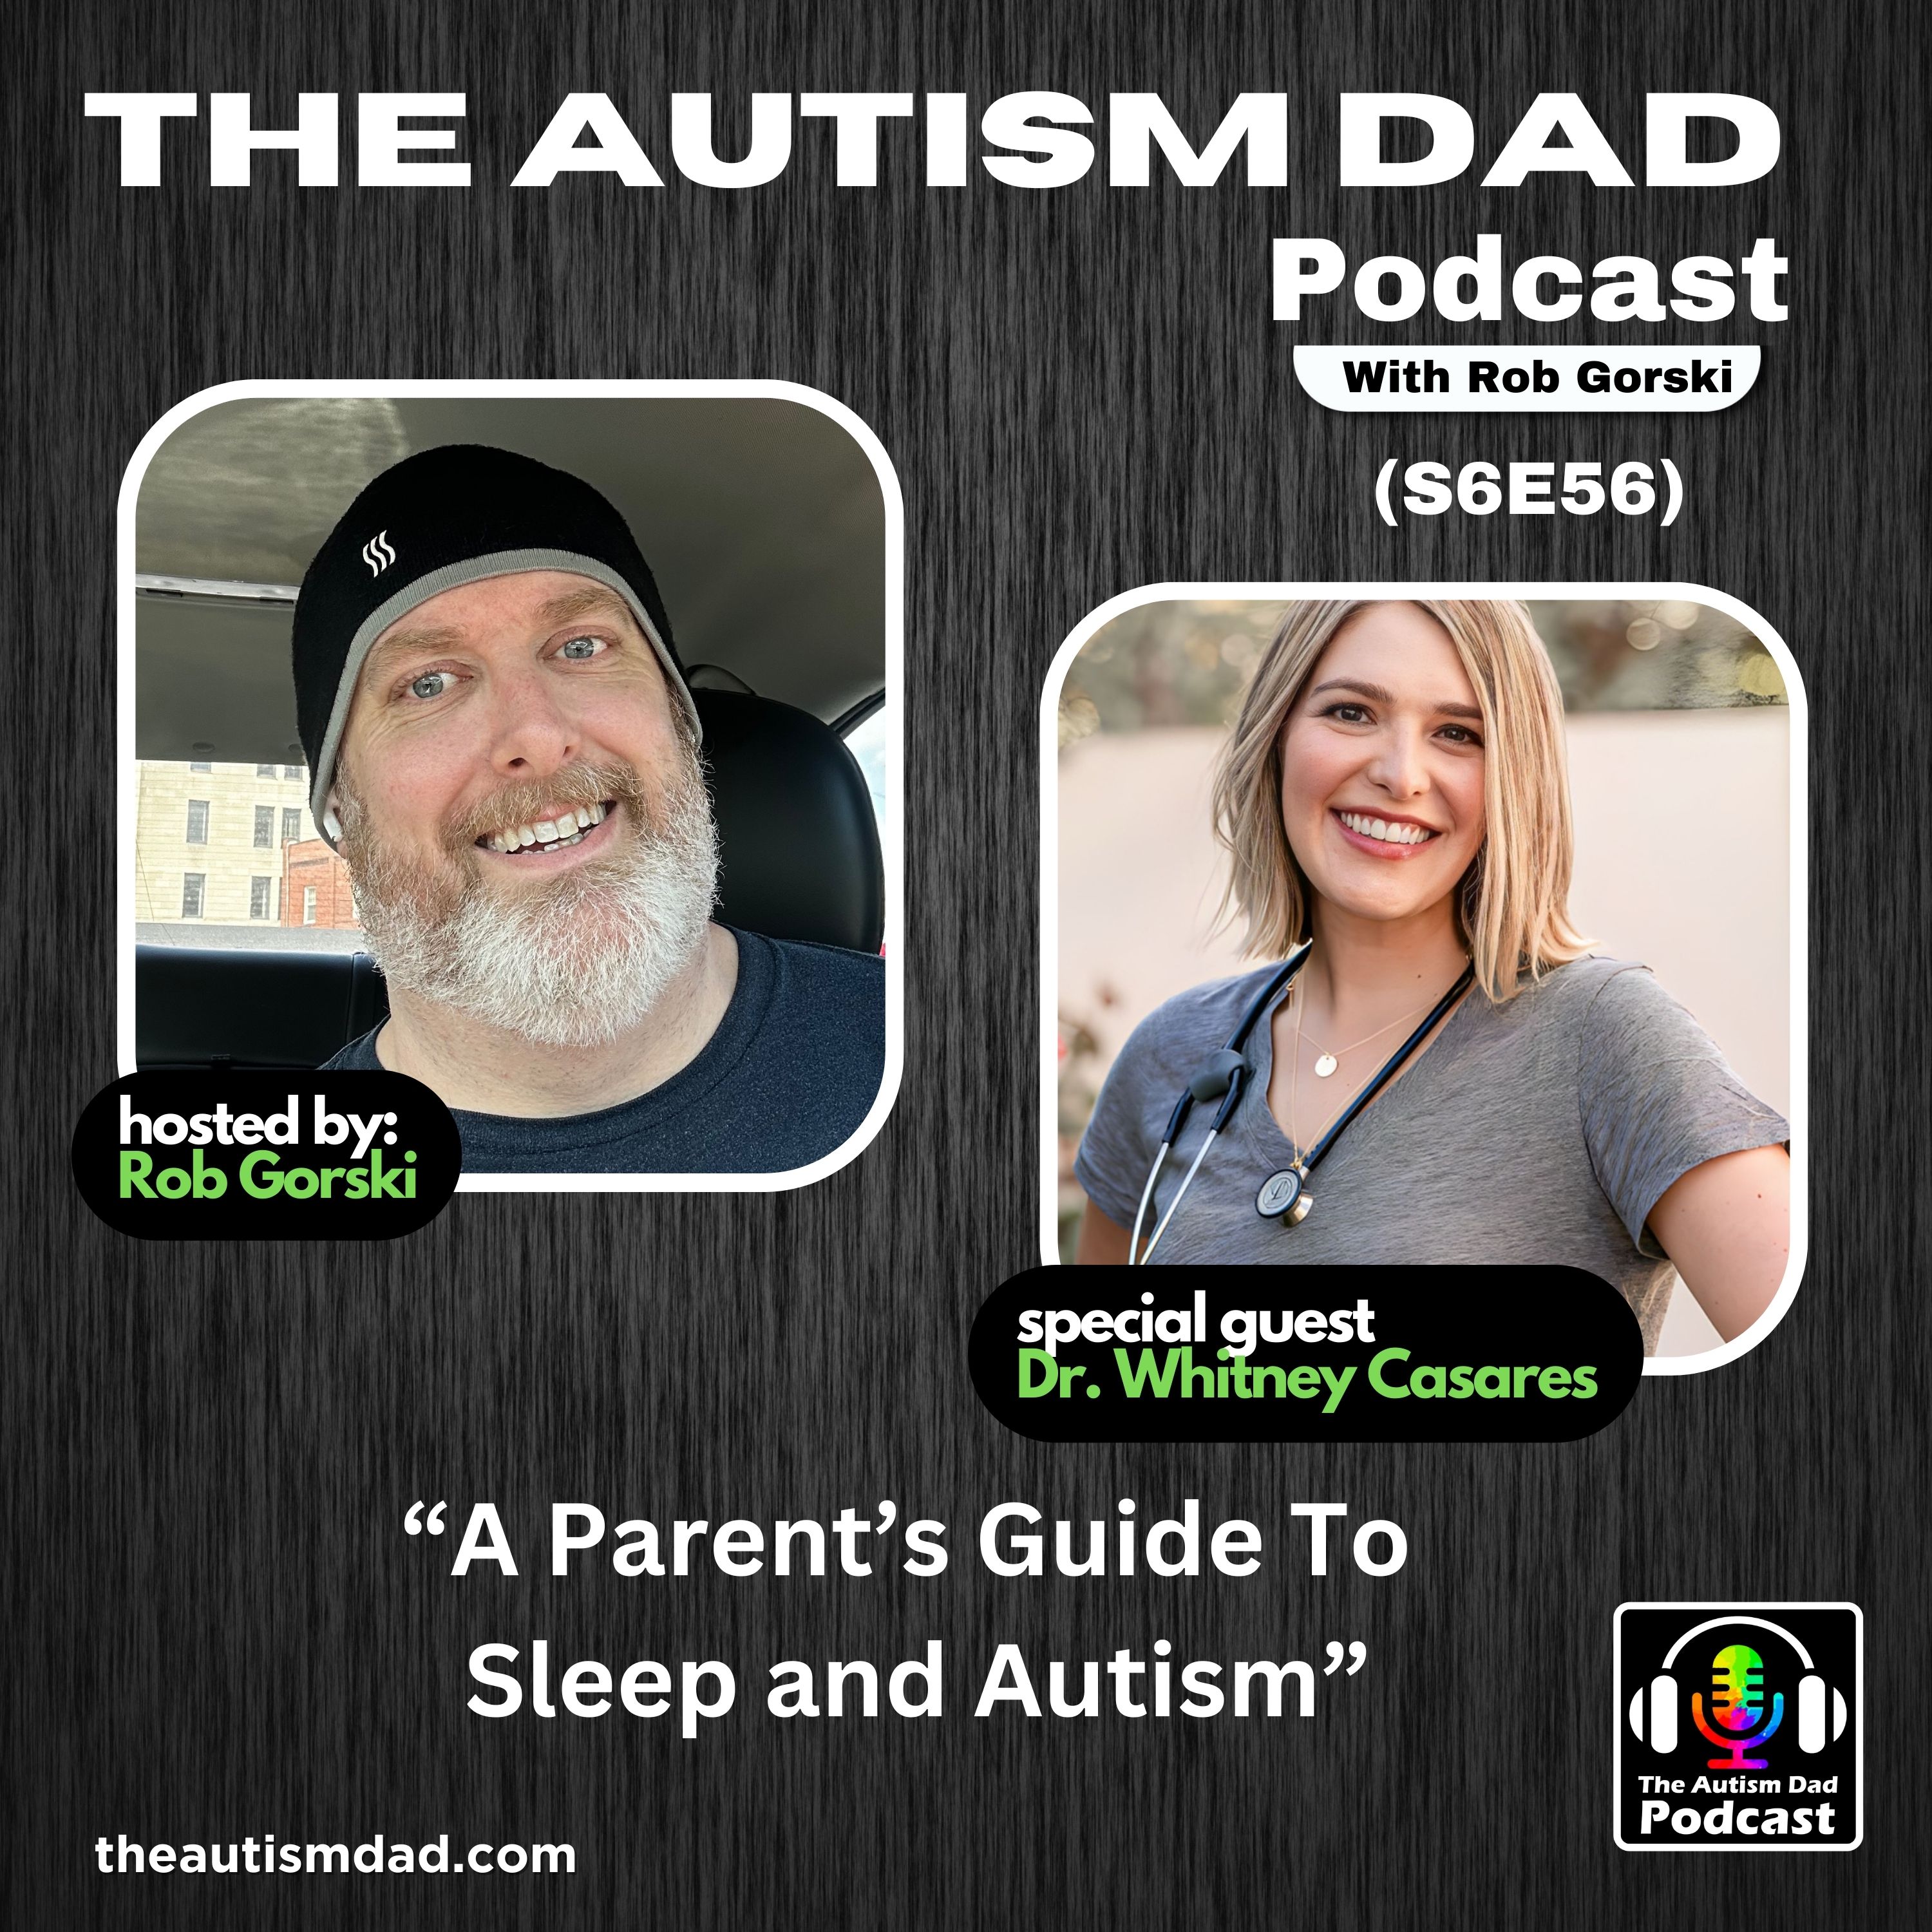 A Parent's Guide To Sleep and Autism (S6E58)